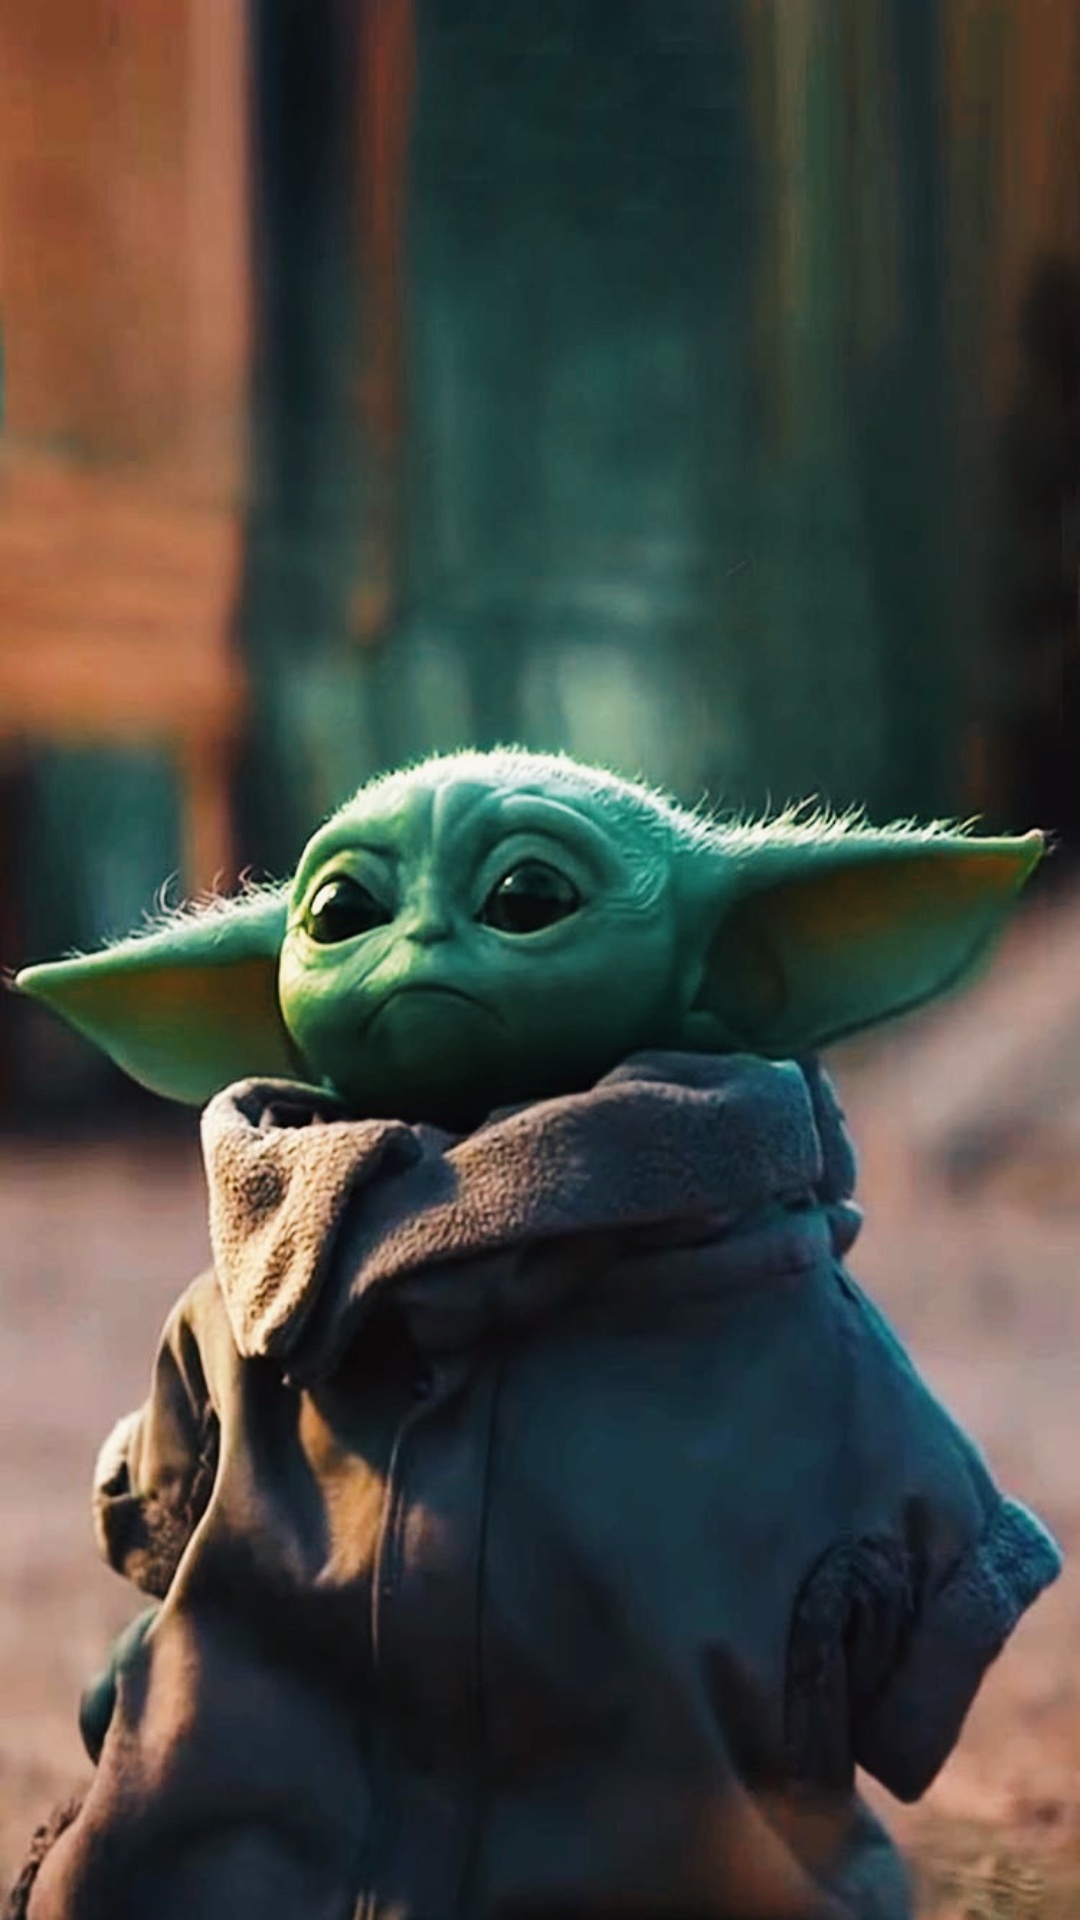 Baby Yoda Wallpapers - Top 65 Best Baby Yoda Wallpapers [ HQ ]